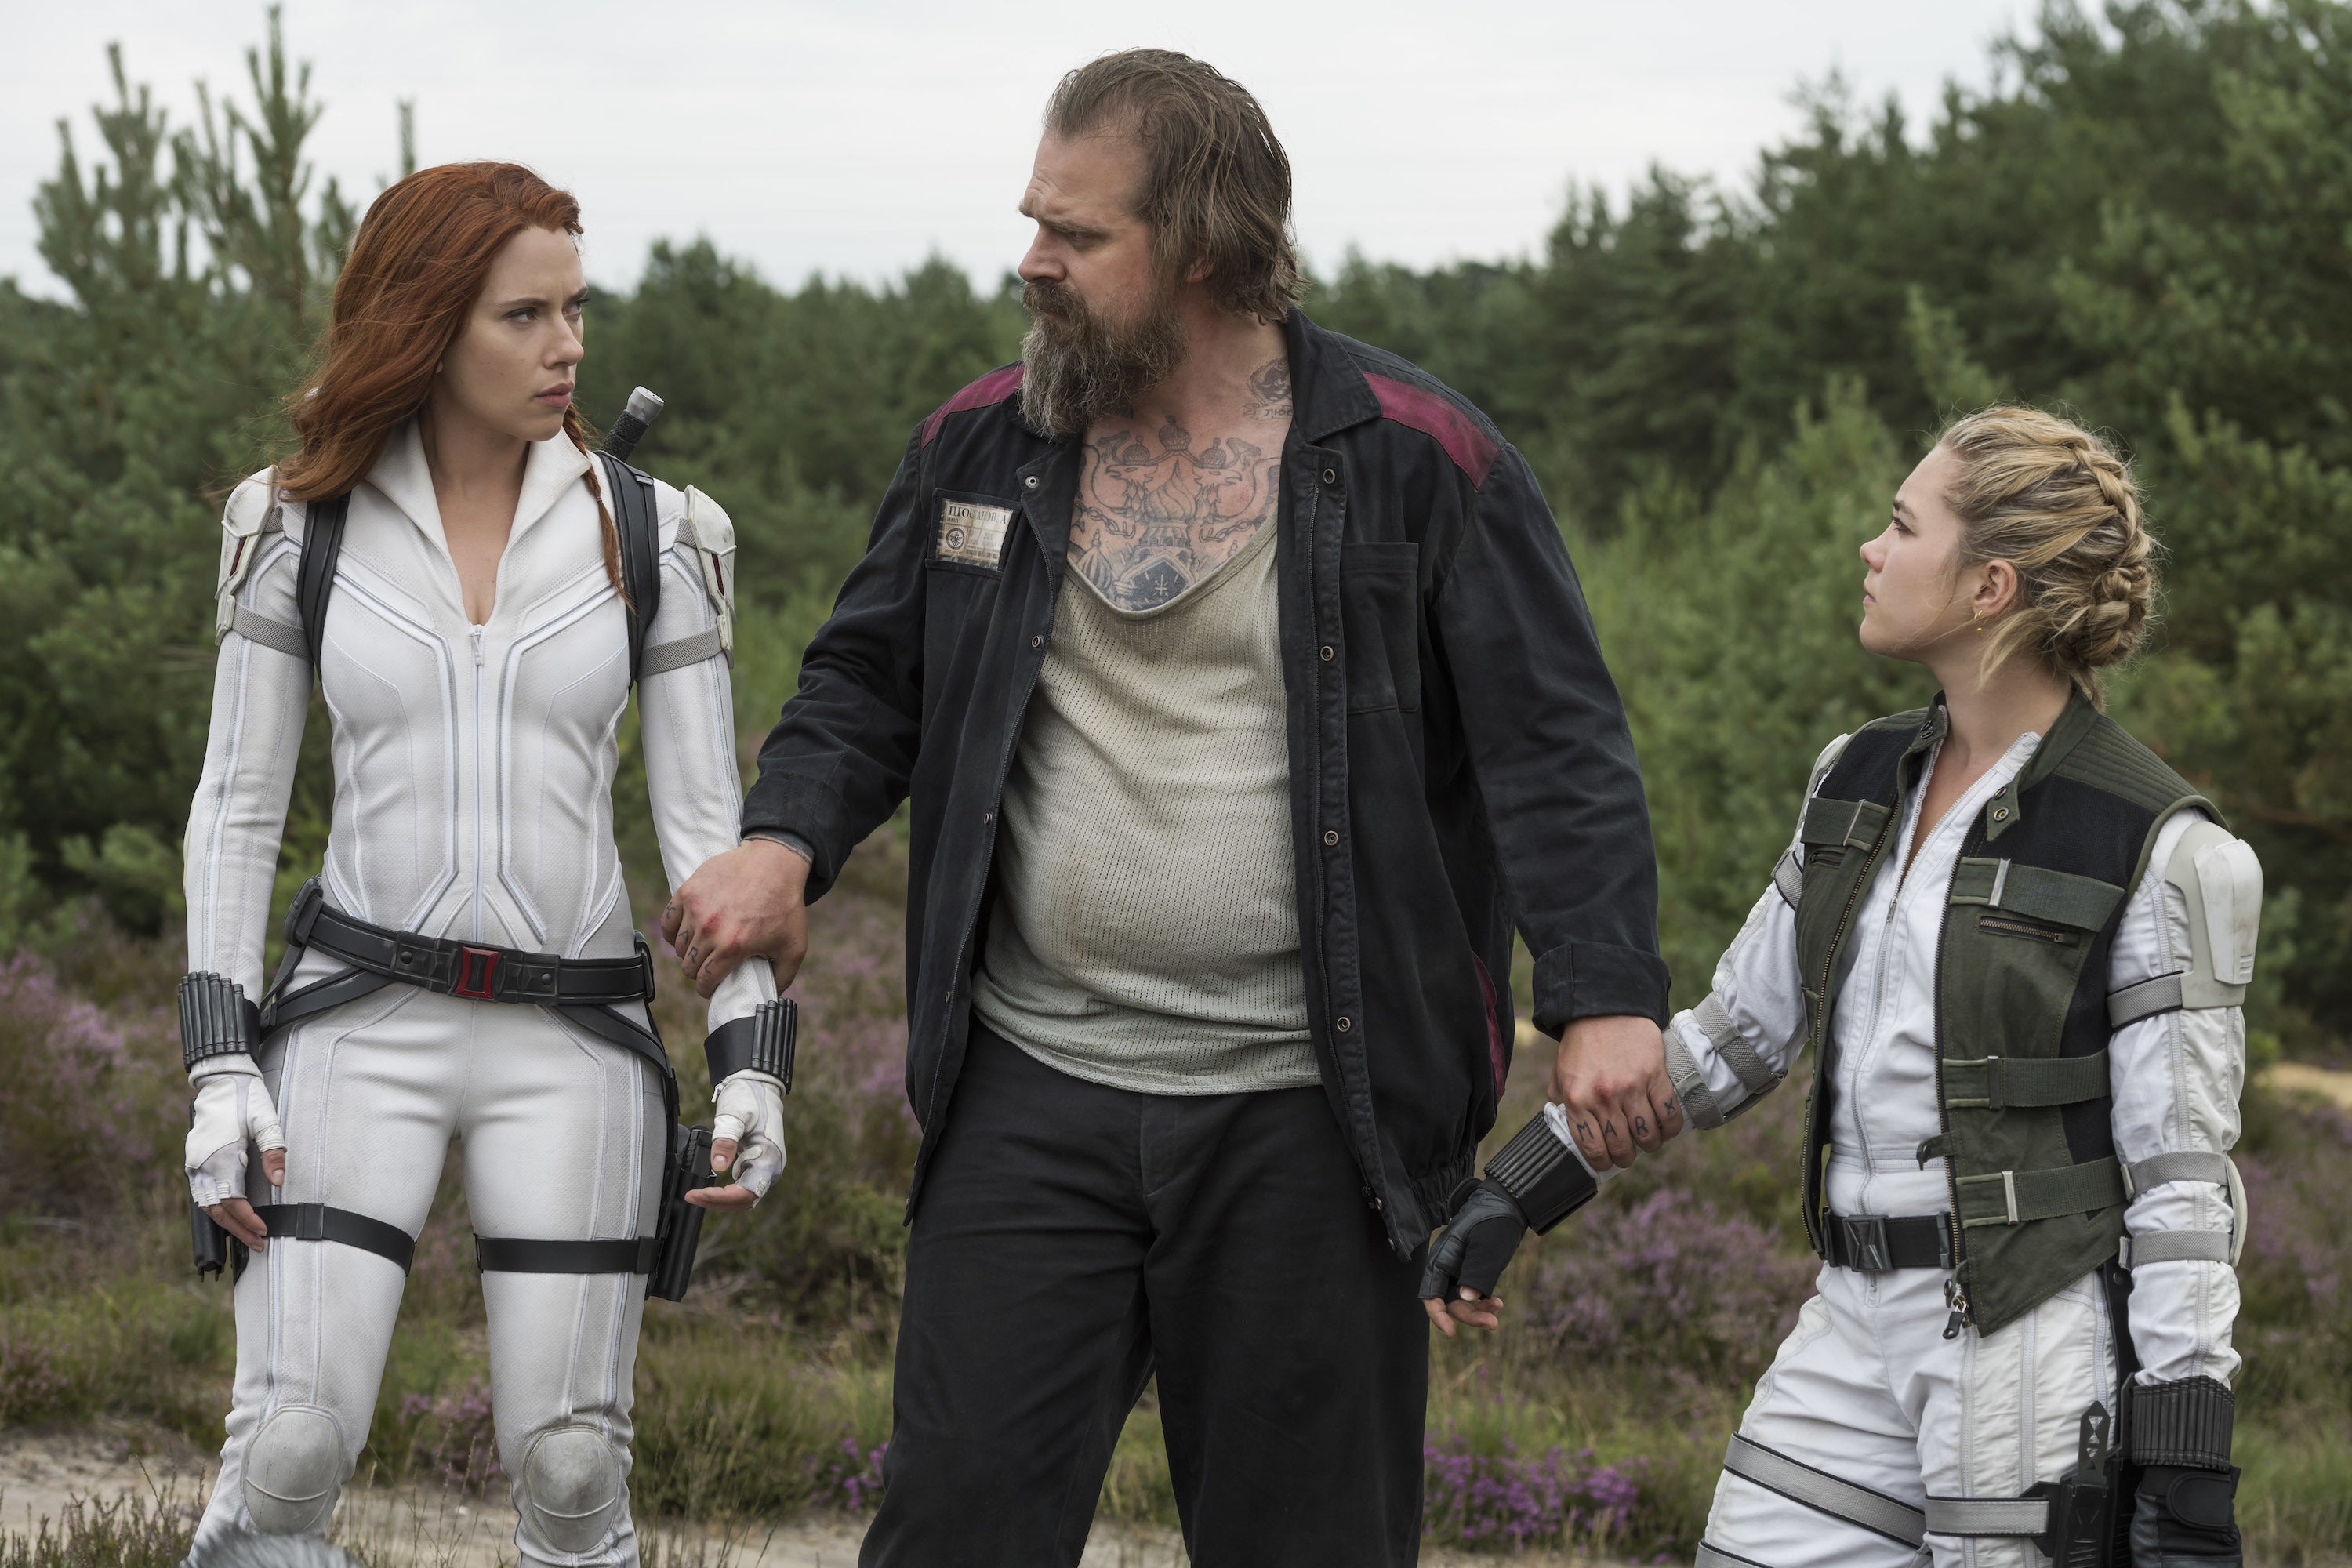 Black Widow and her sister, in white jumpsuits, on either side of their father, Alexei.